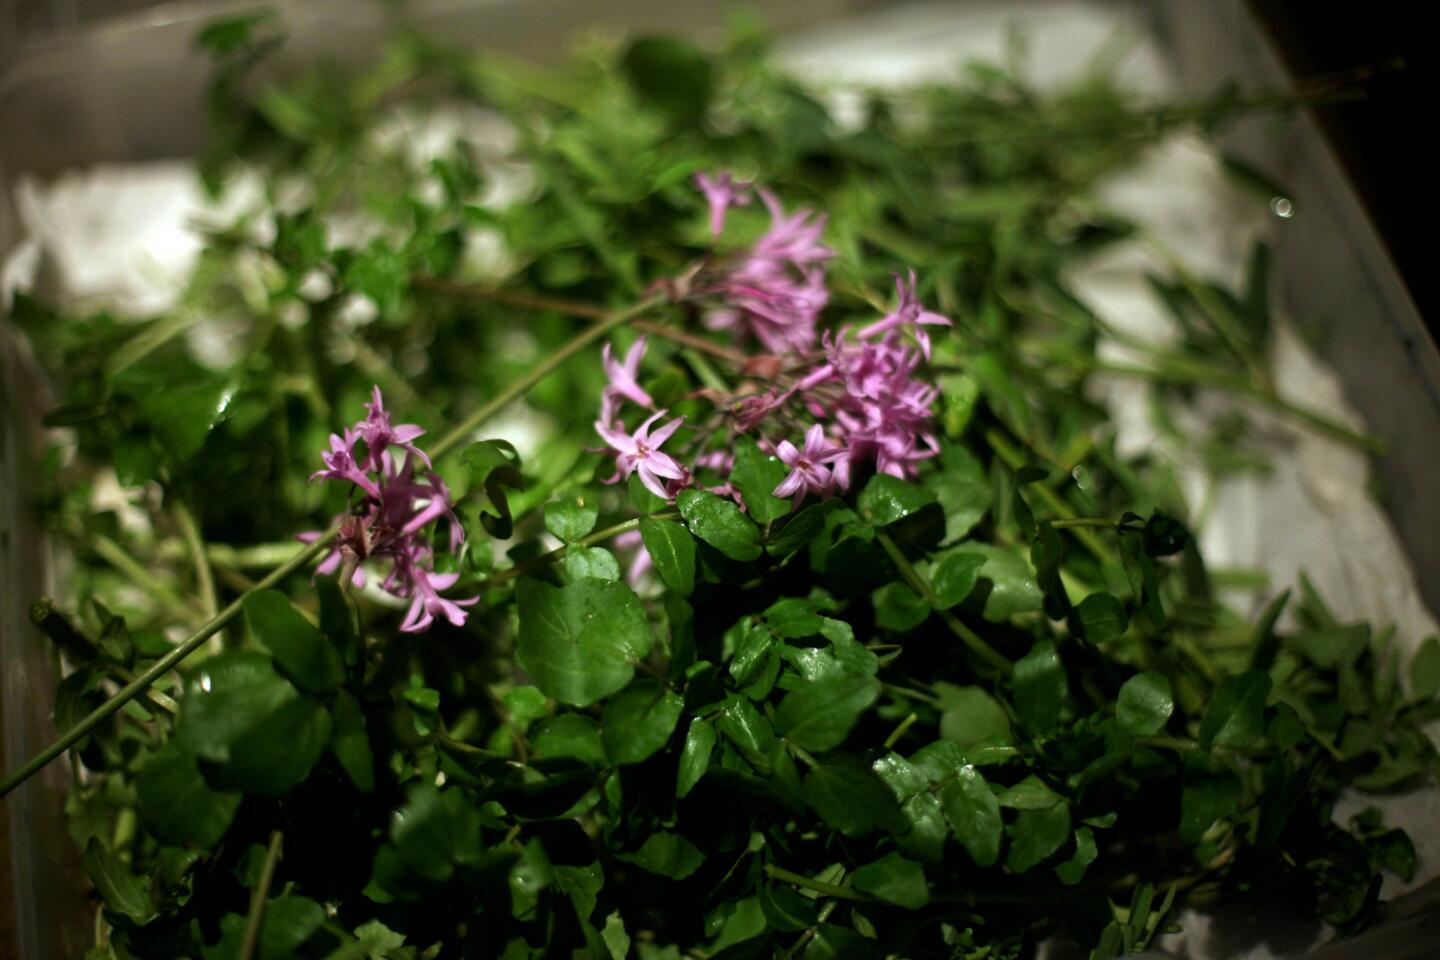 The freshest local ingredients, like these foraged herbs, are the centerpiece of the menu.